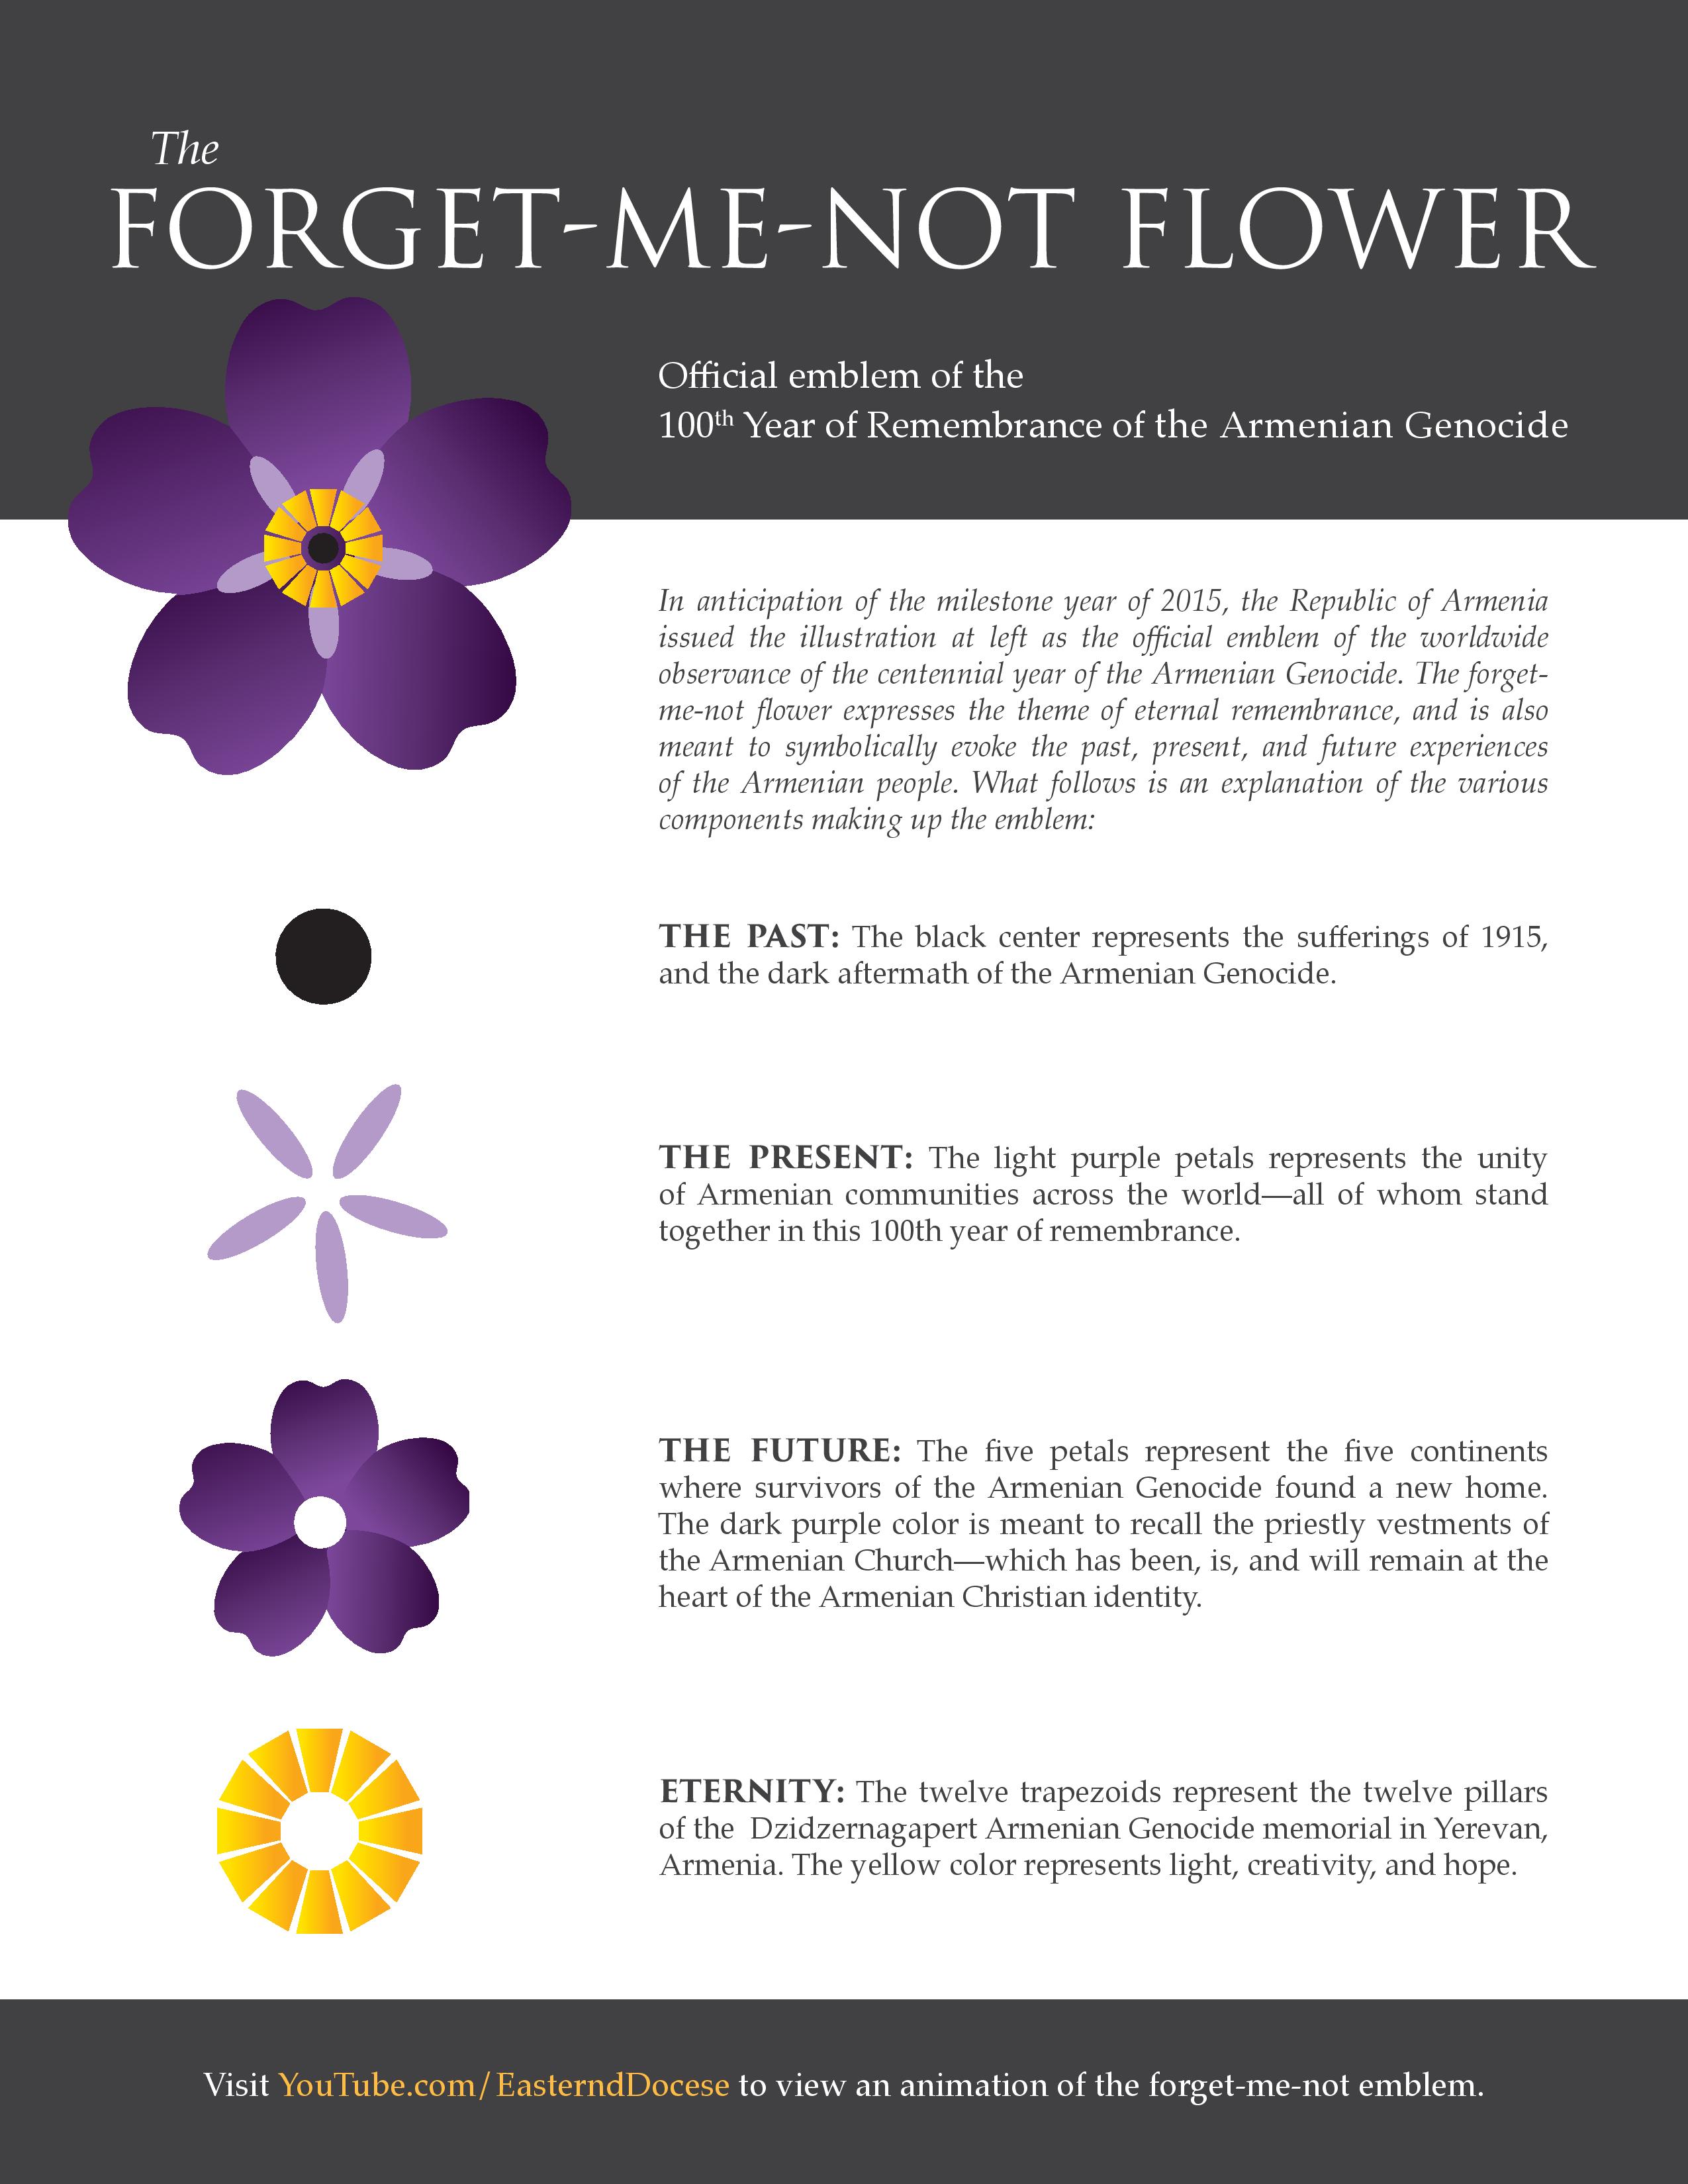 "In anticipation of the milestone year of 2015, the Republic of Armenia issued the illustration at left as the official emblem of the worldwide observance of the centennial year of the Armenian Genocide. The forgetme-not flower expresses the theme of eternal remembrance, and is also meant to symbolically evoke the past, present, and future experiences of the Armenian people. What follows is an explanation of the various components making up the emblem."